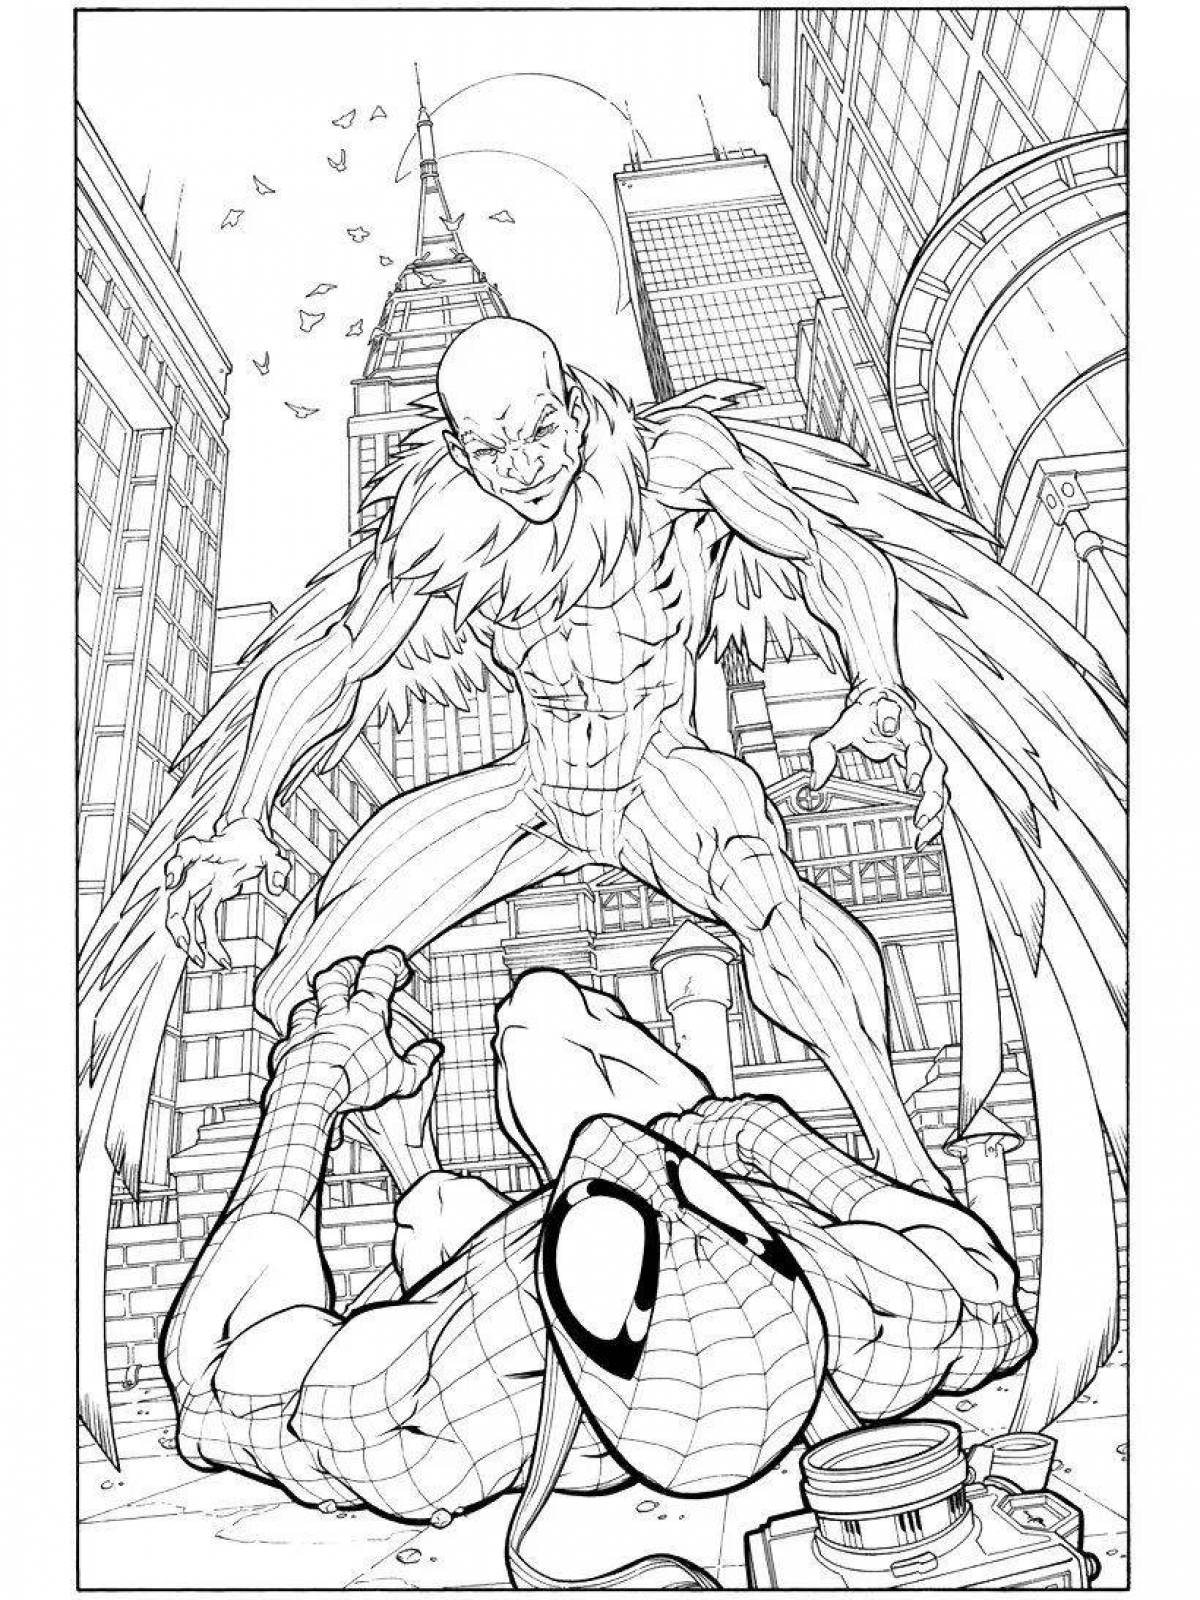 Excellent spider-man coloring page